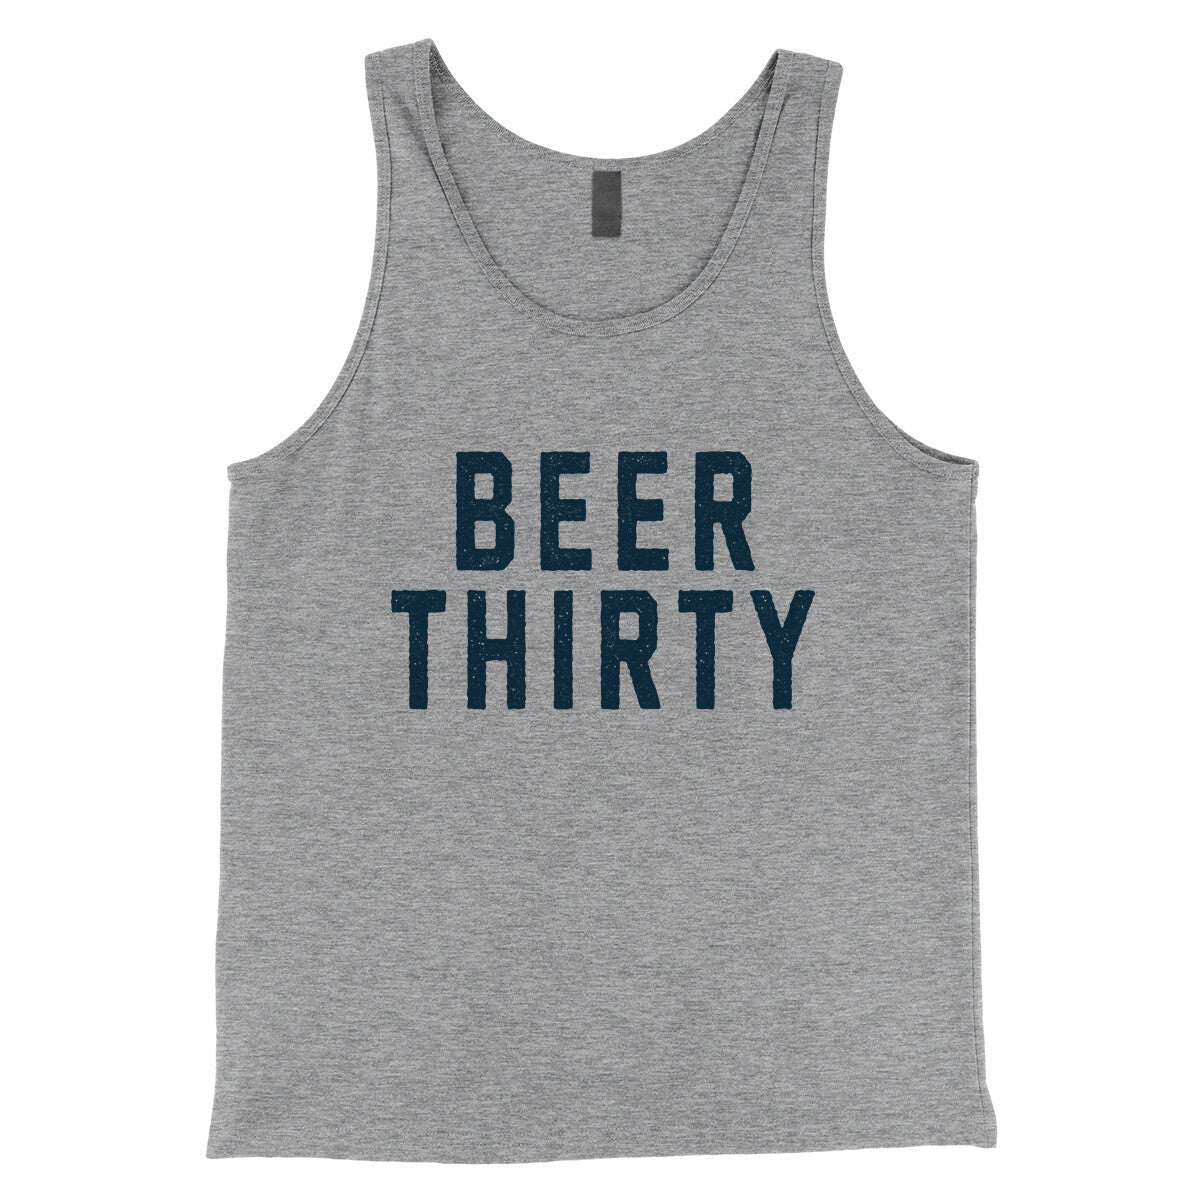 Beer Thirty in Athletic Heather Color